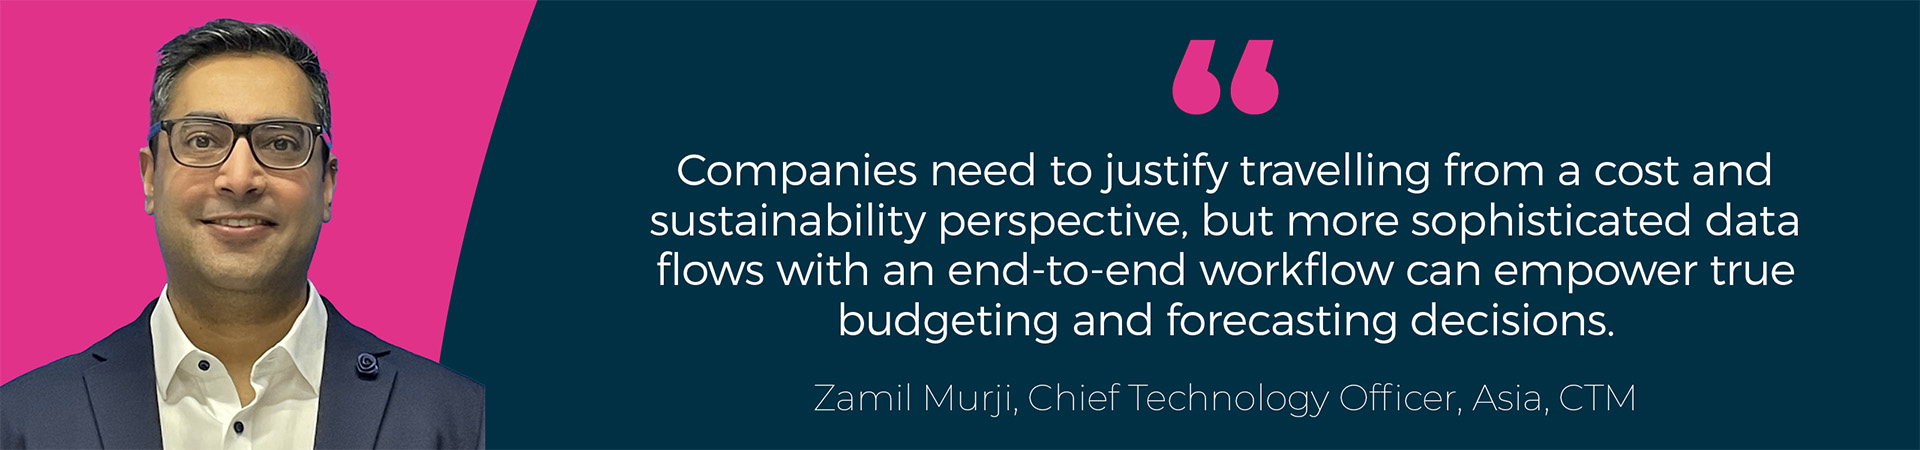 Banner - "Companies need to justify travelling from a cost and sustainability perspective, but more sophisticated data flows with an end-to-end workflow can empower true budgeting and forecasting decisions" Zamil Murji quote